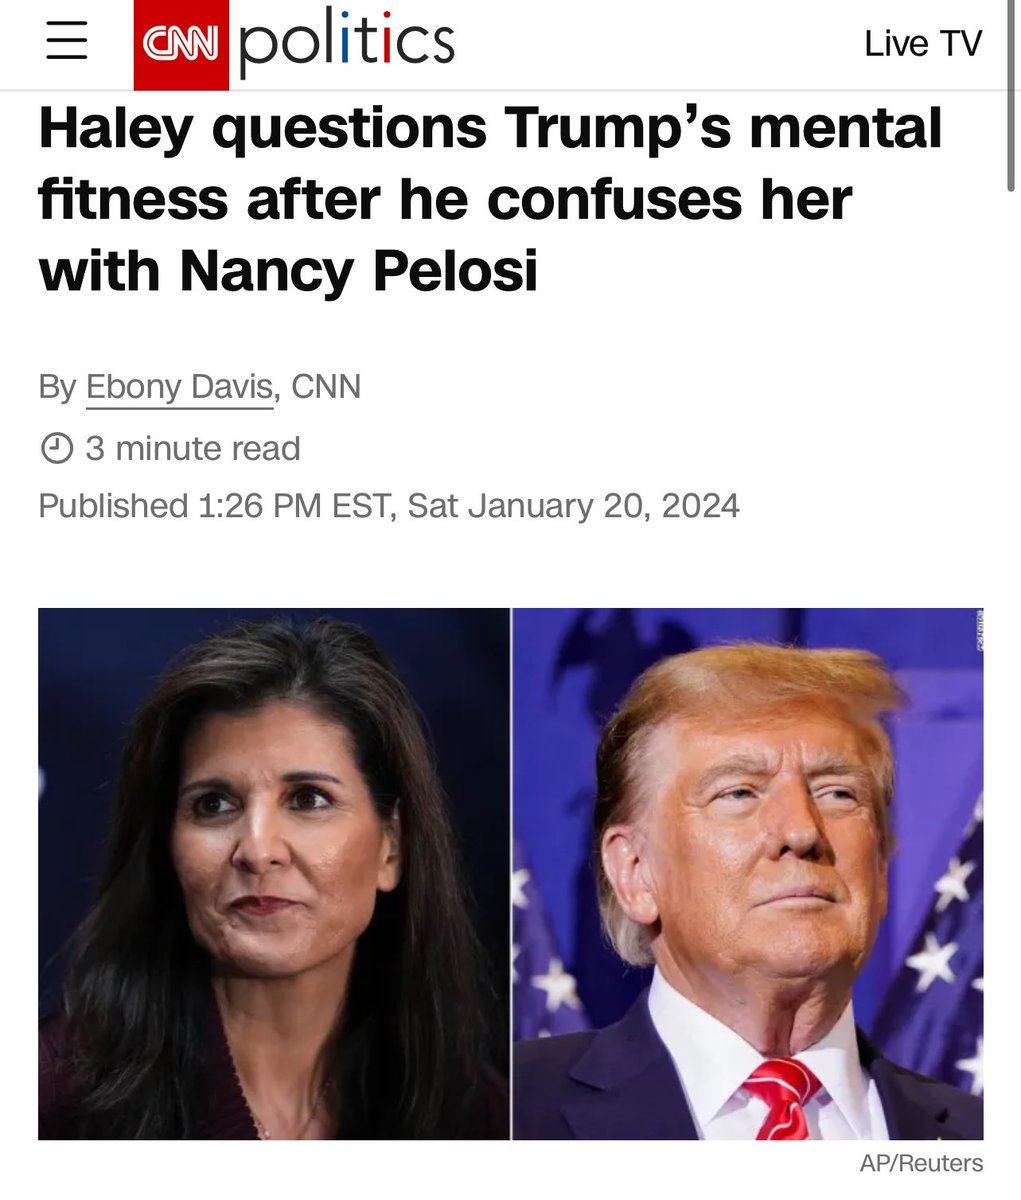 Nikki Haley questions Donald Trump’s mental fitness after he appeared to confuse her with former House Speaker Nancy Pelosi when talking about the January 6, 2021, attack on the US Capitol. Read my latest: cnn.com/2024/01/20/pol…